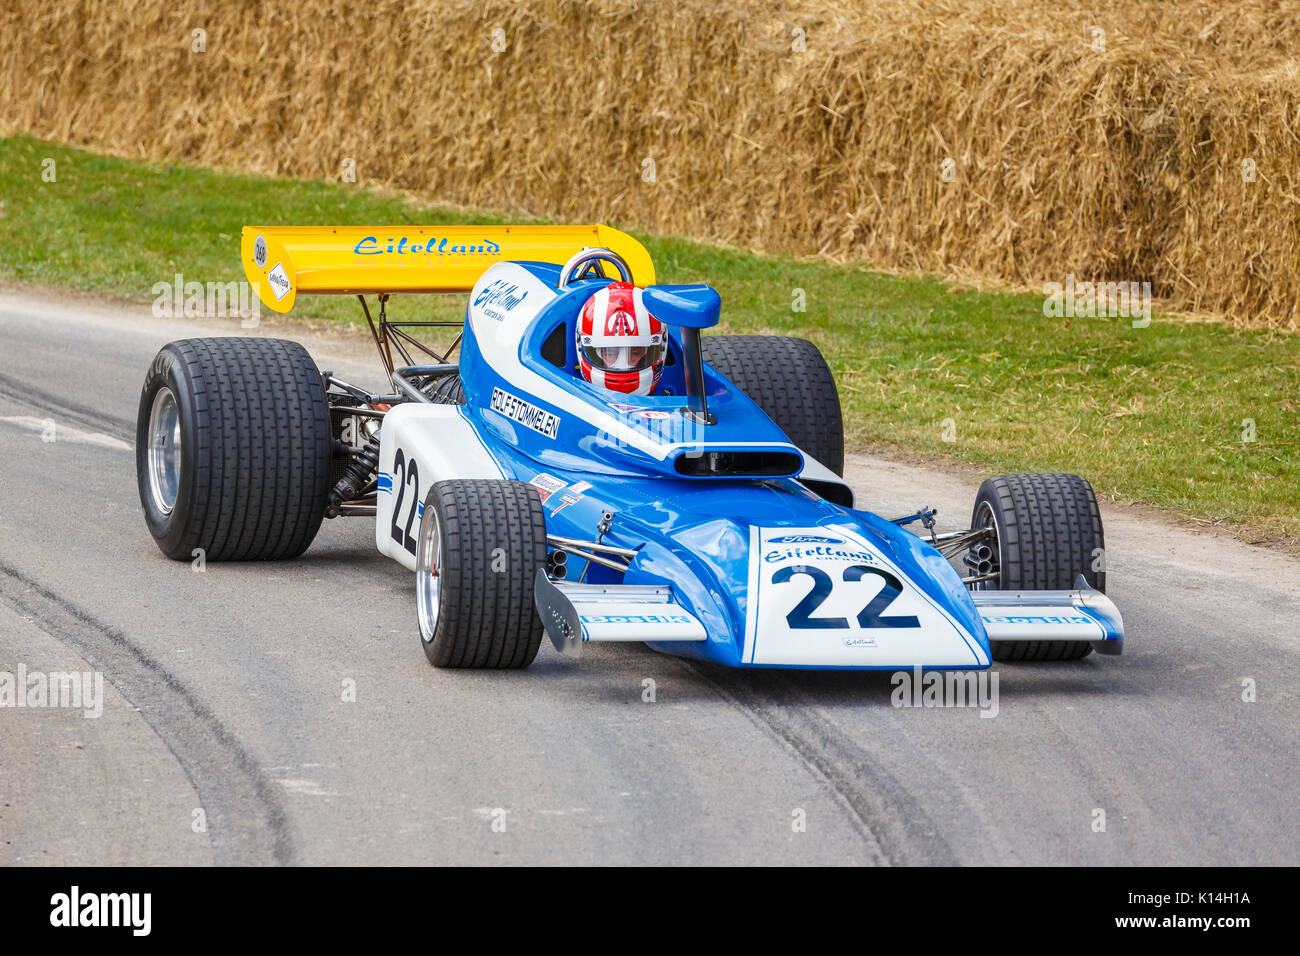 1972 Eifelland-Cosworth E21 with driver David Shaw at the 2017 Goodwood Festival of Speed, Sussex, UK. Stock Photo